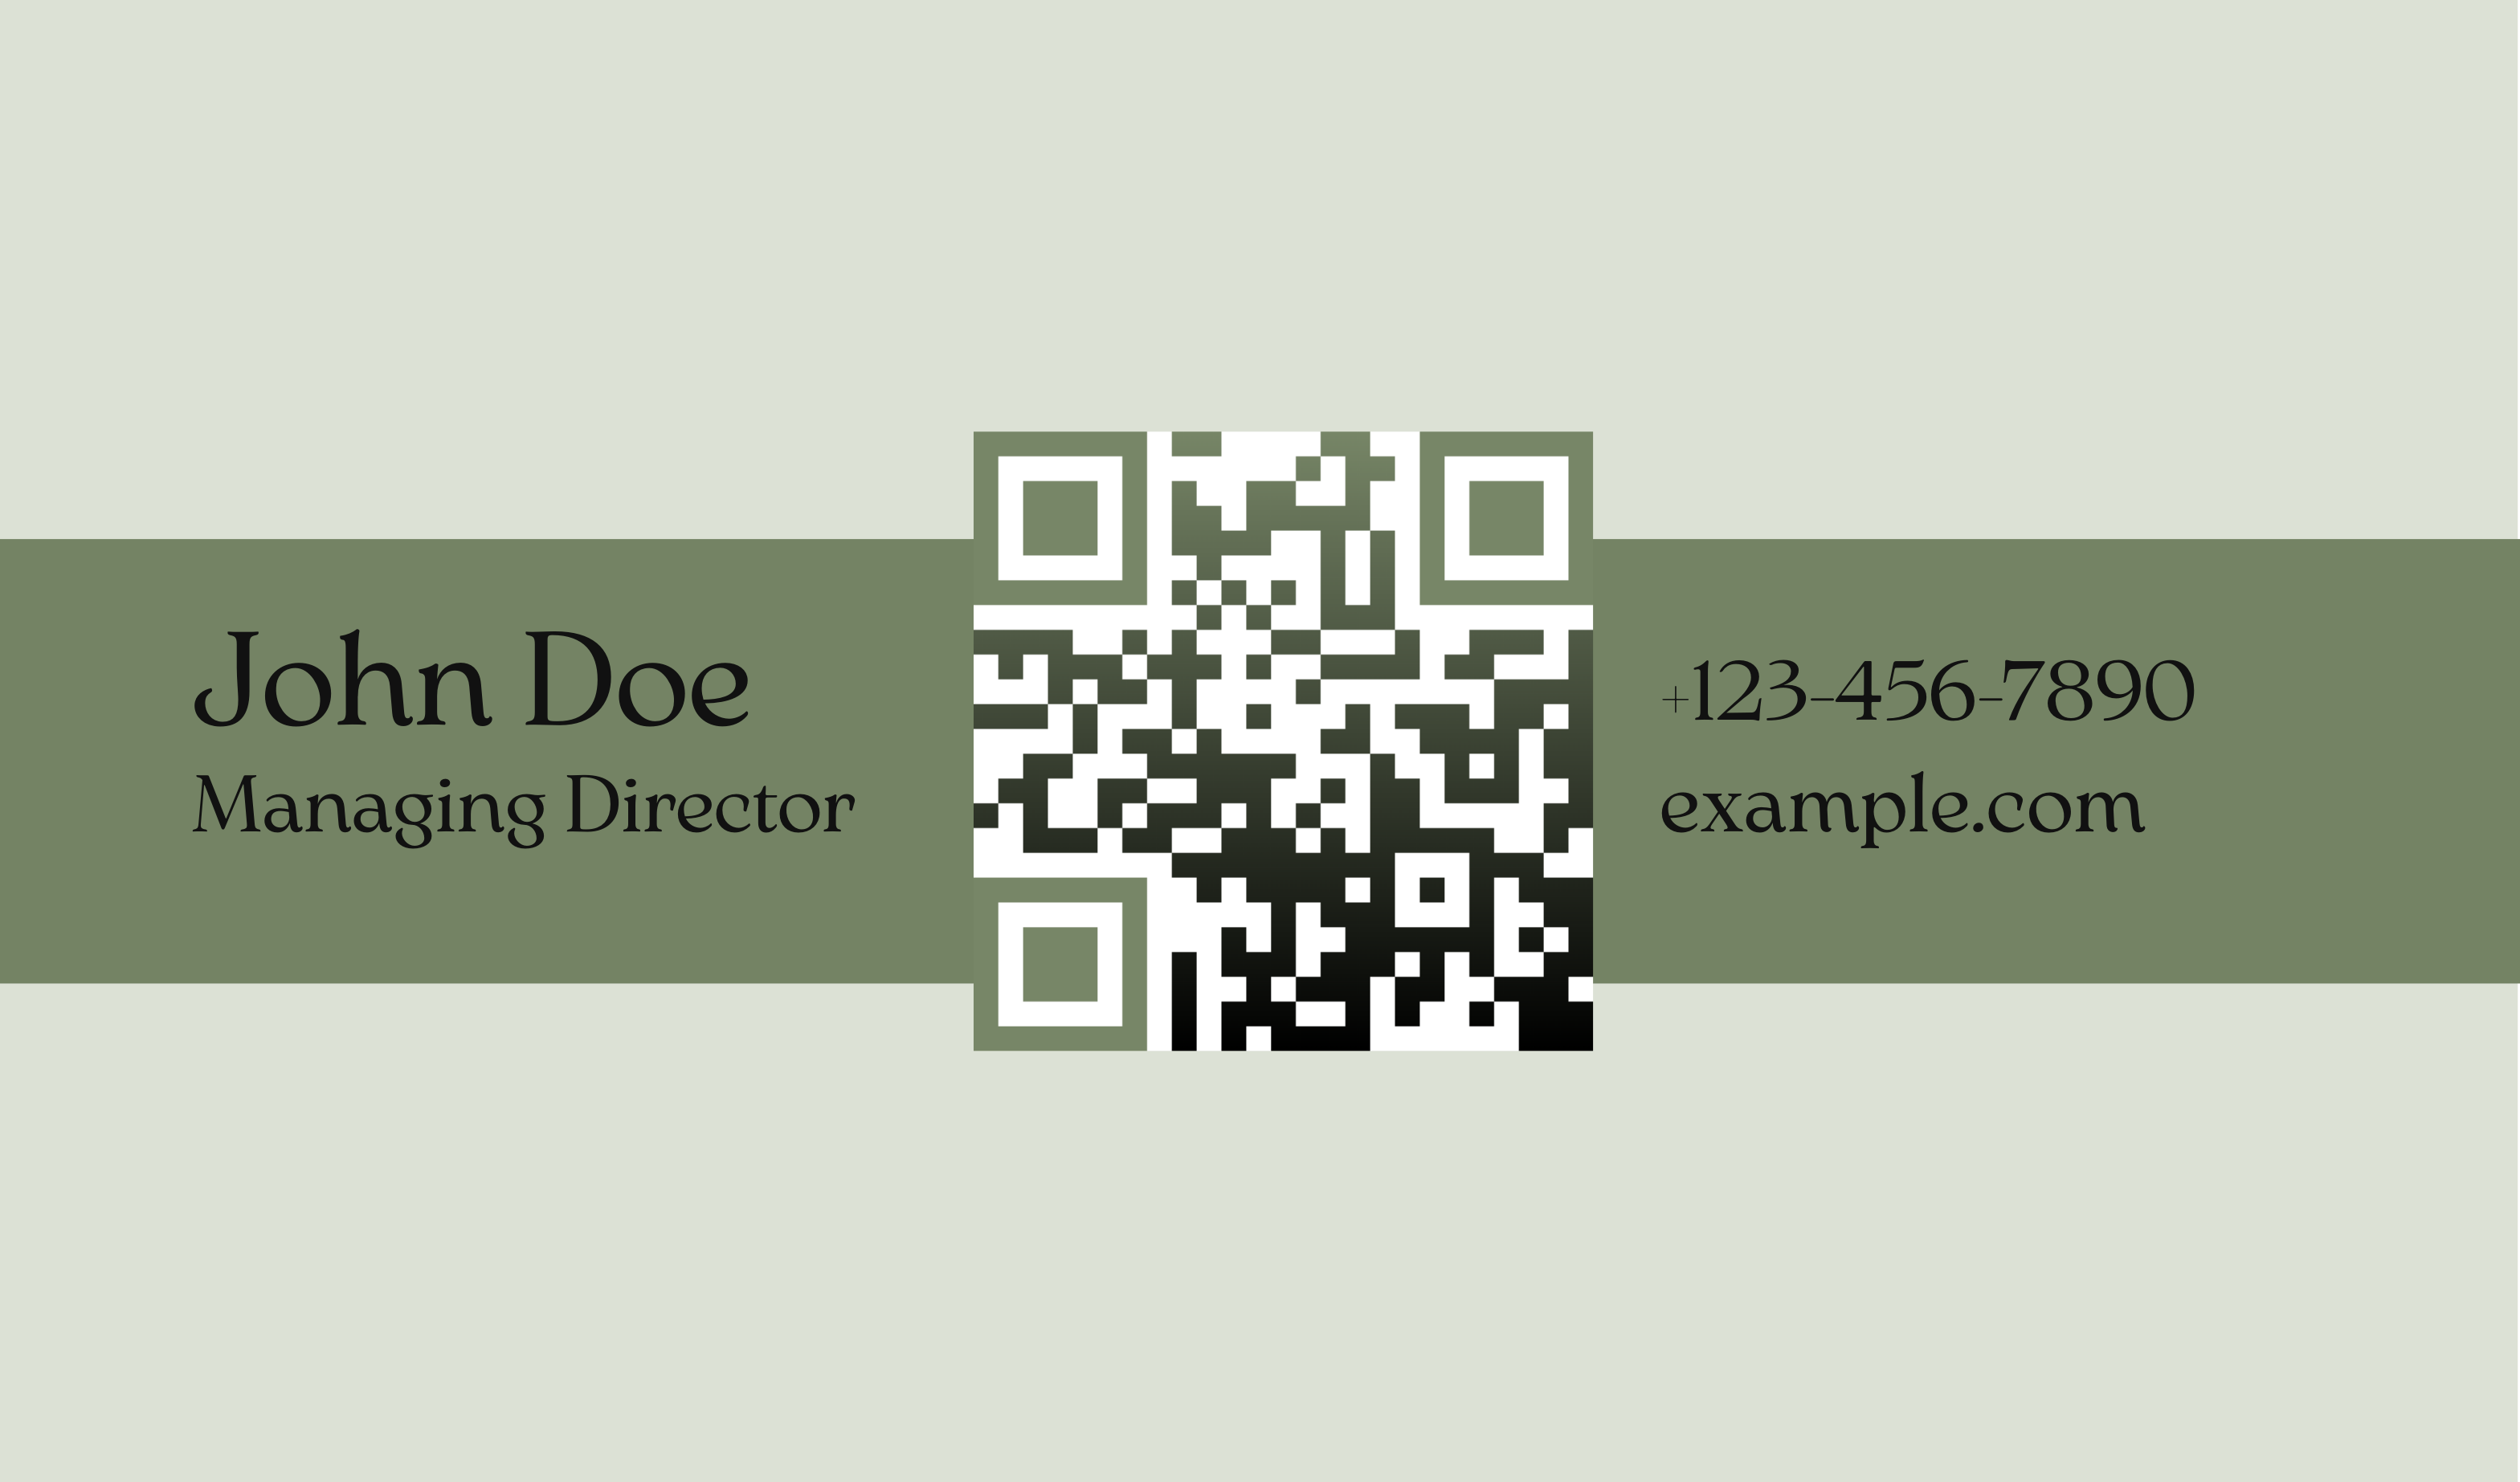 Green business card template with a QR code in the middle